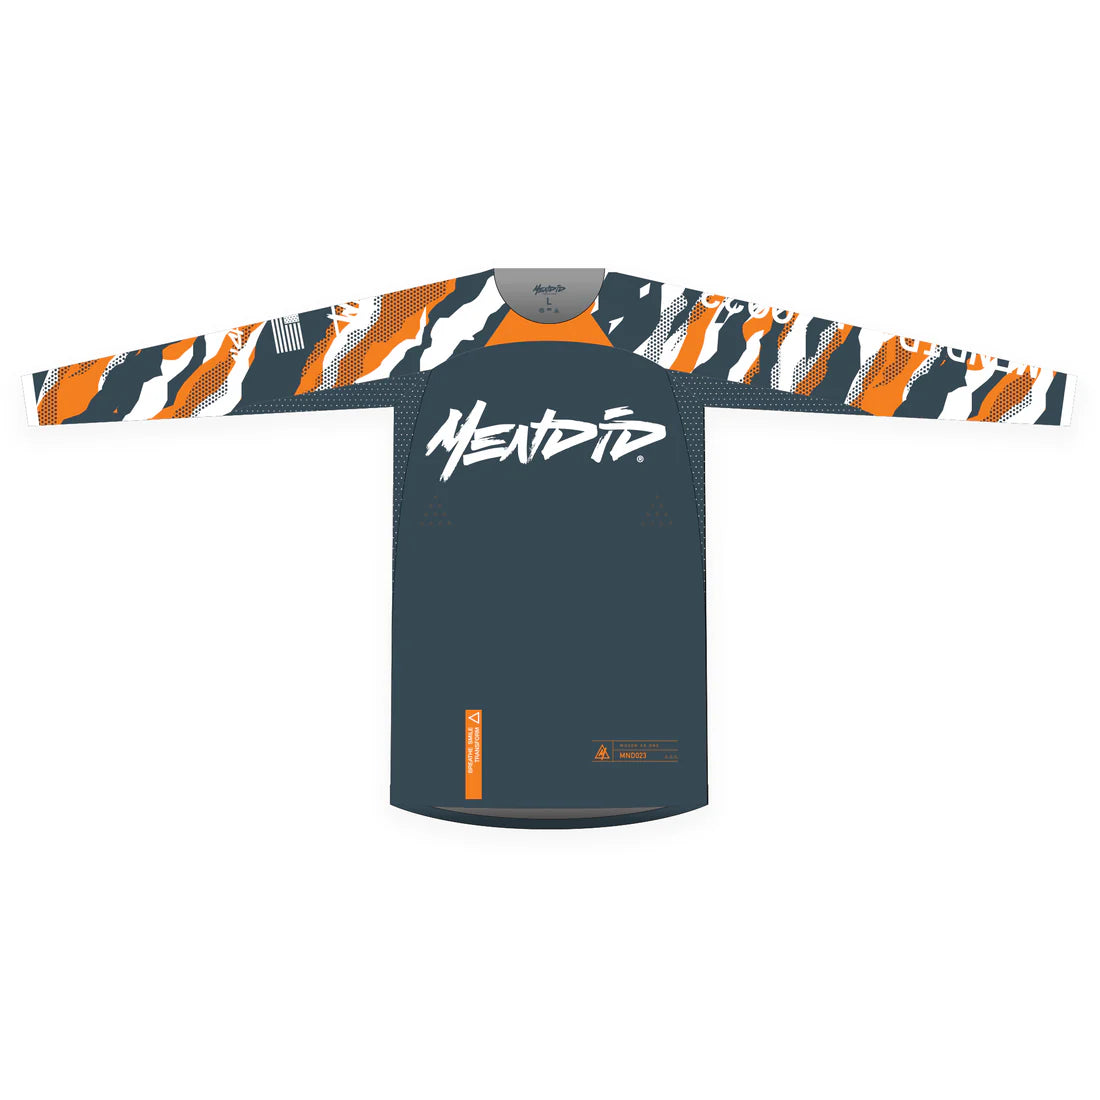 Night Jungle youth Motocross Jersey by  Mendid